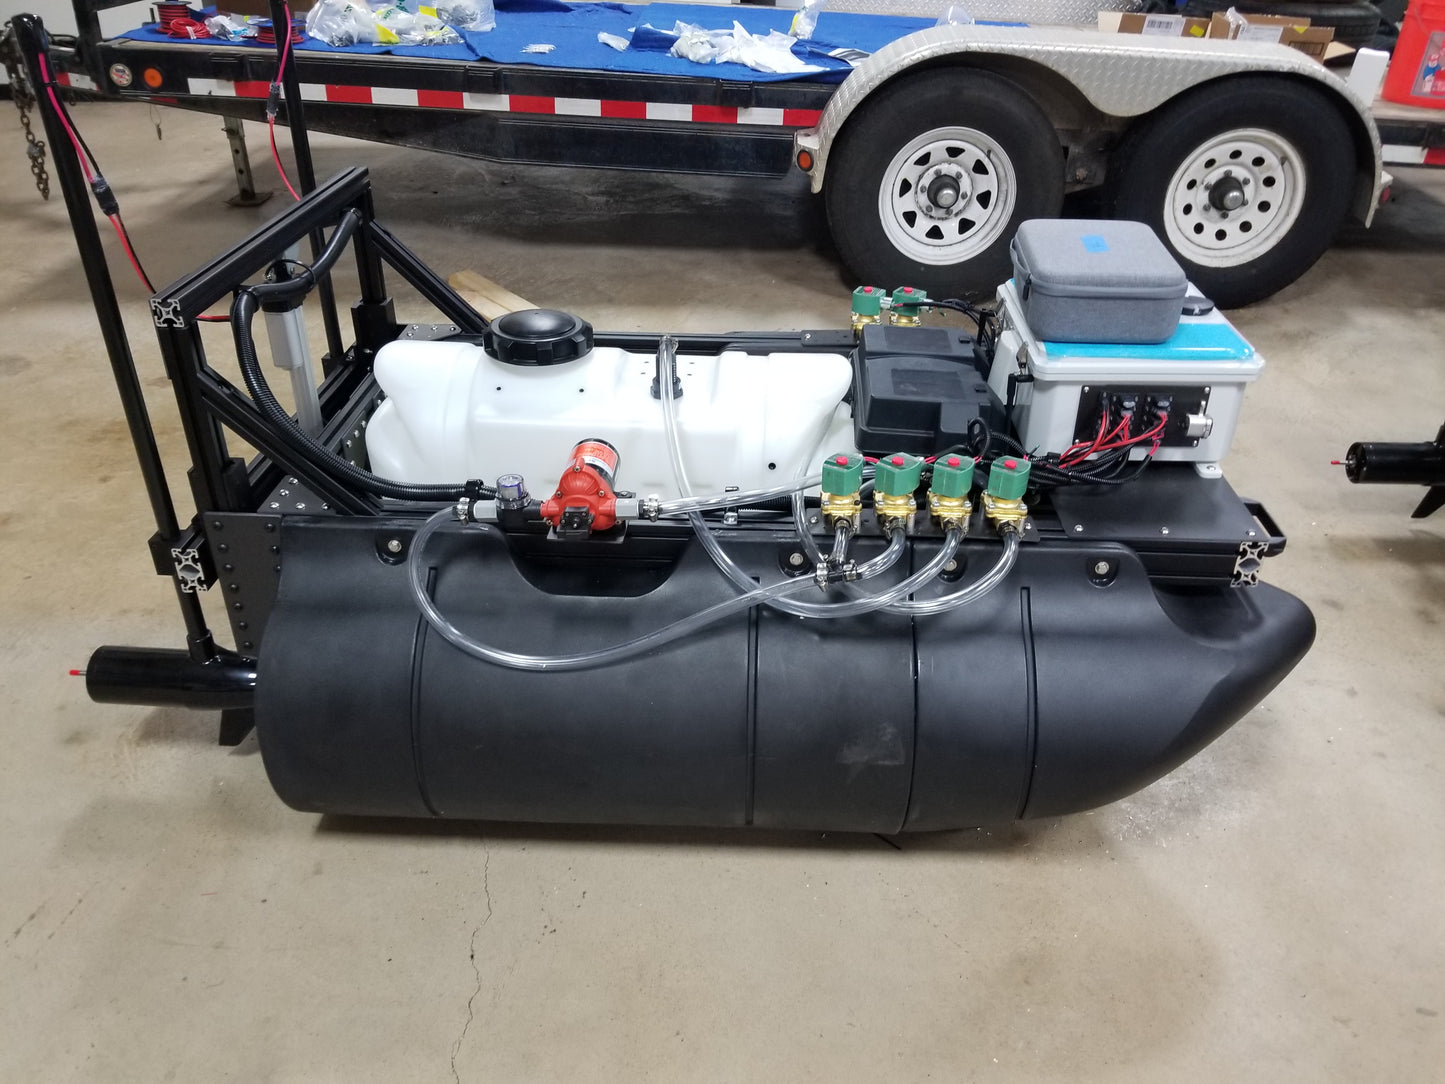 ADAPT Drone Boat - Autonomous Spraying Boat, Extended Length, Electric